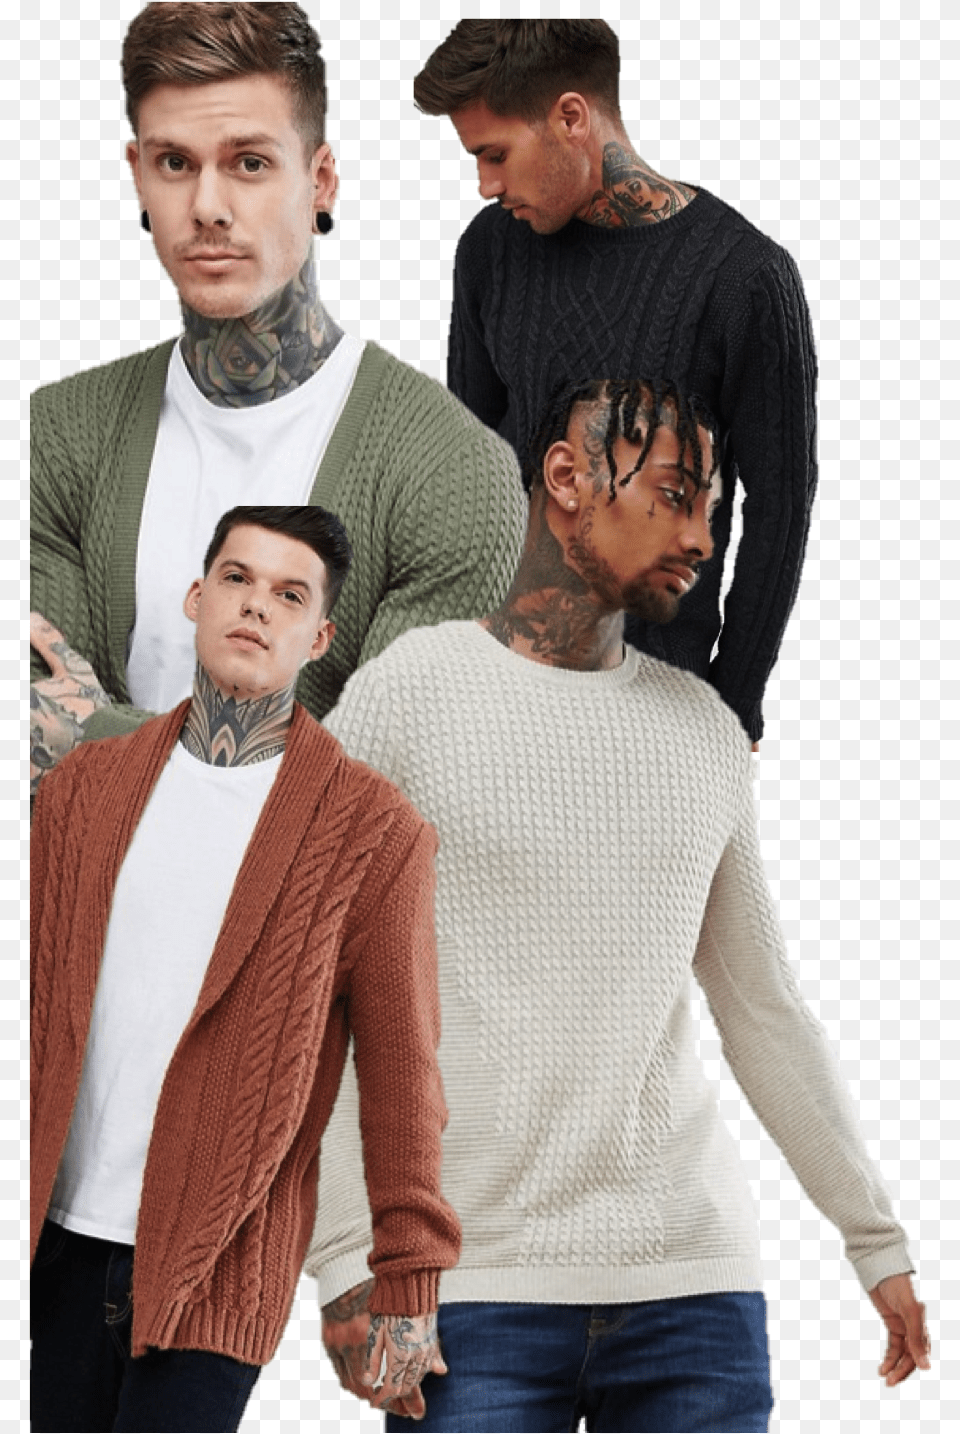 Asos Models Male Tattoos Download, Clothing, Sweater, Sleeve, Knitwear Png Image